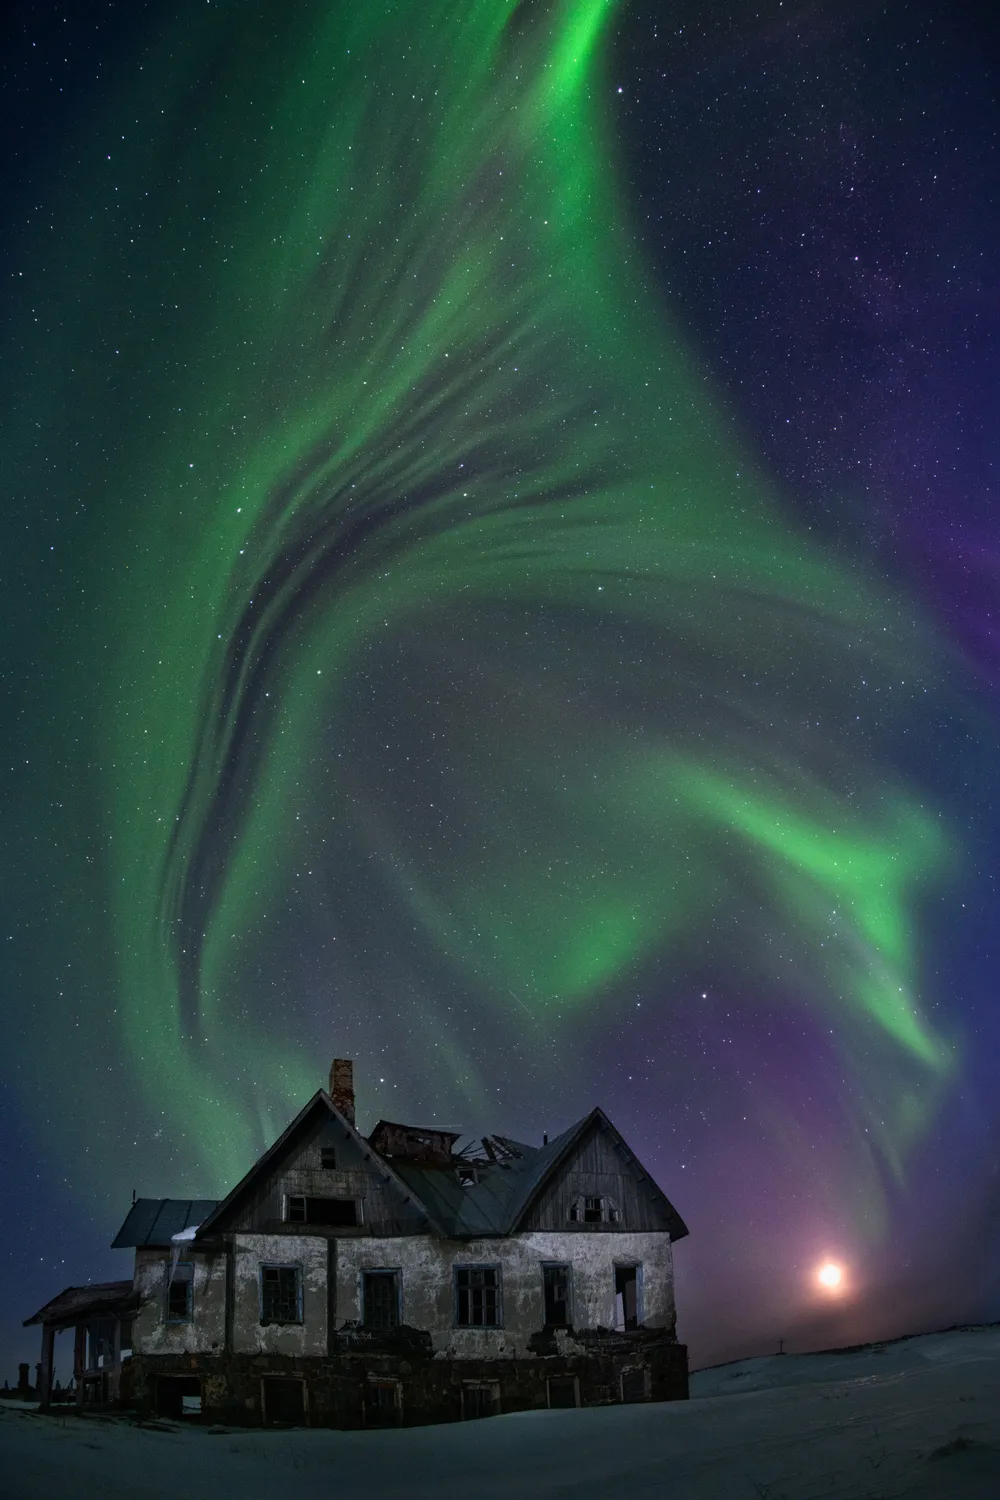 Magical Aurora Borealis over an abandoned house in the village of Dalnie Zelentsy (Murmansk region).